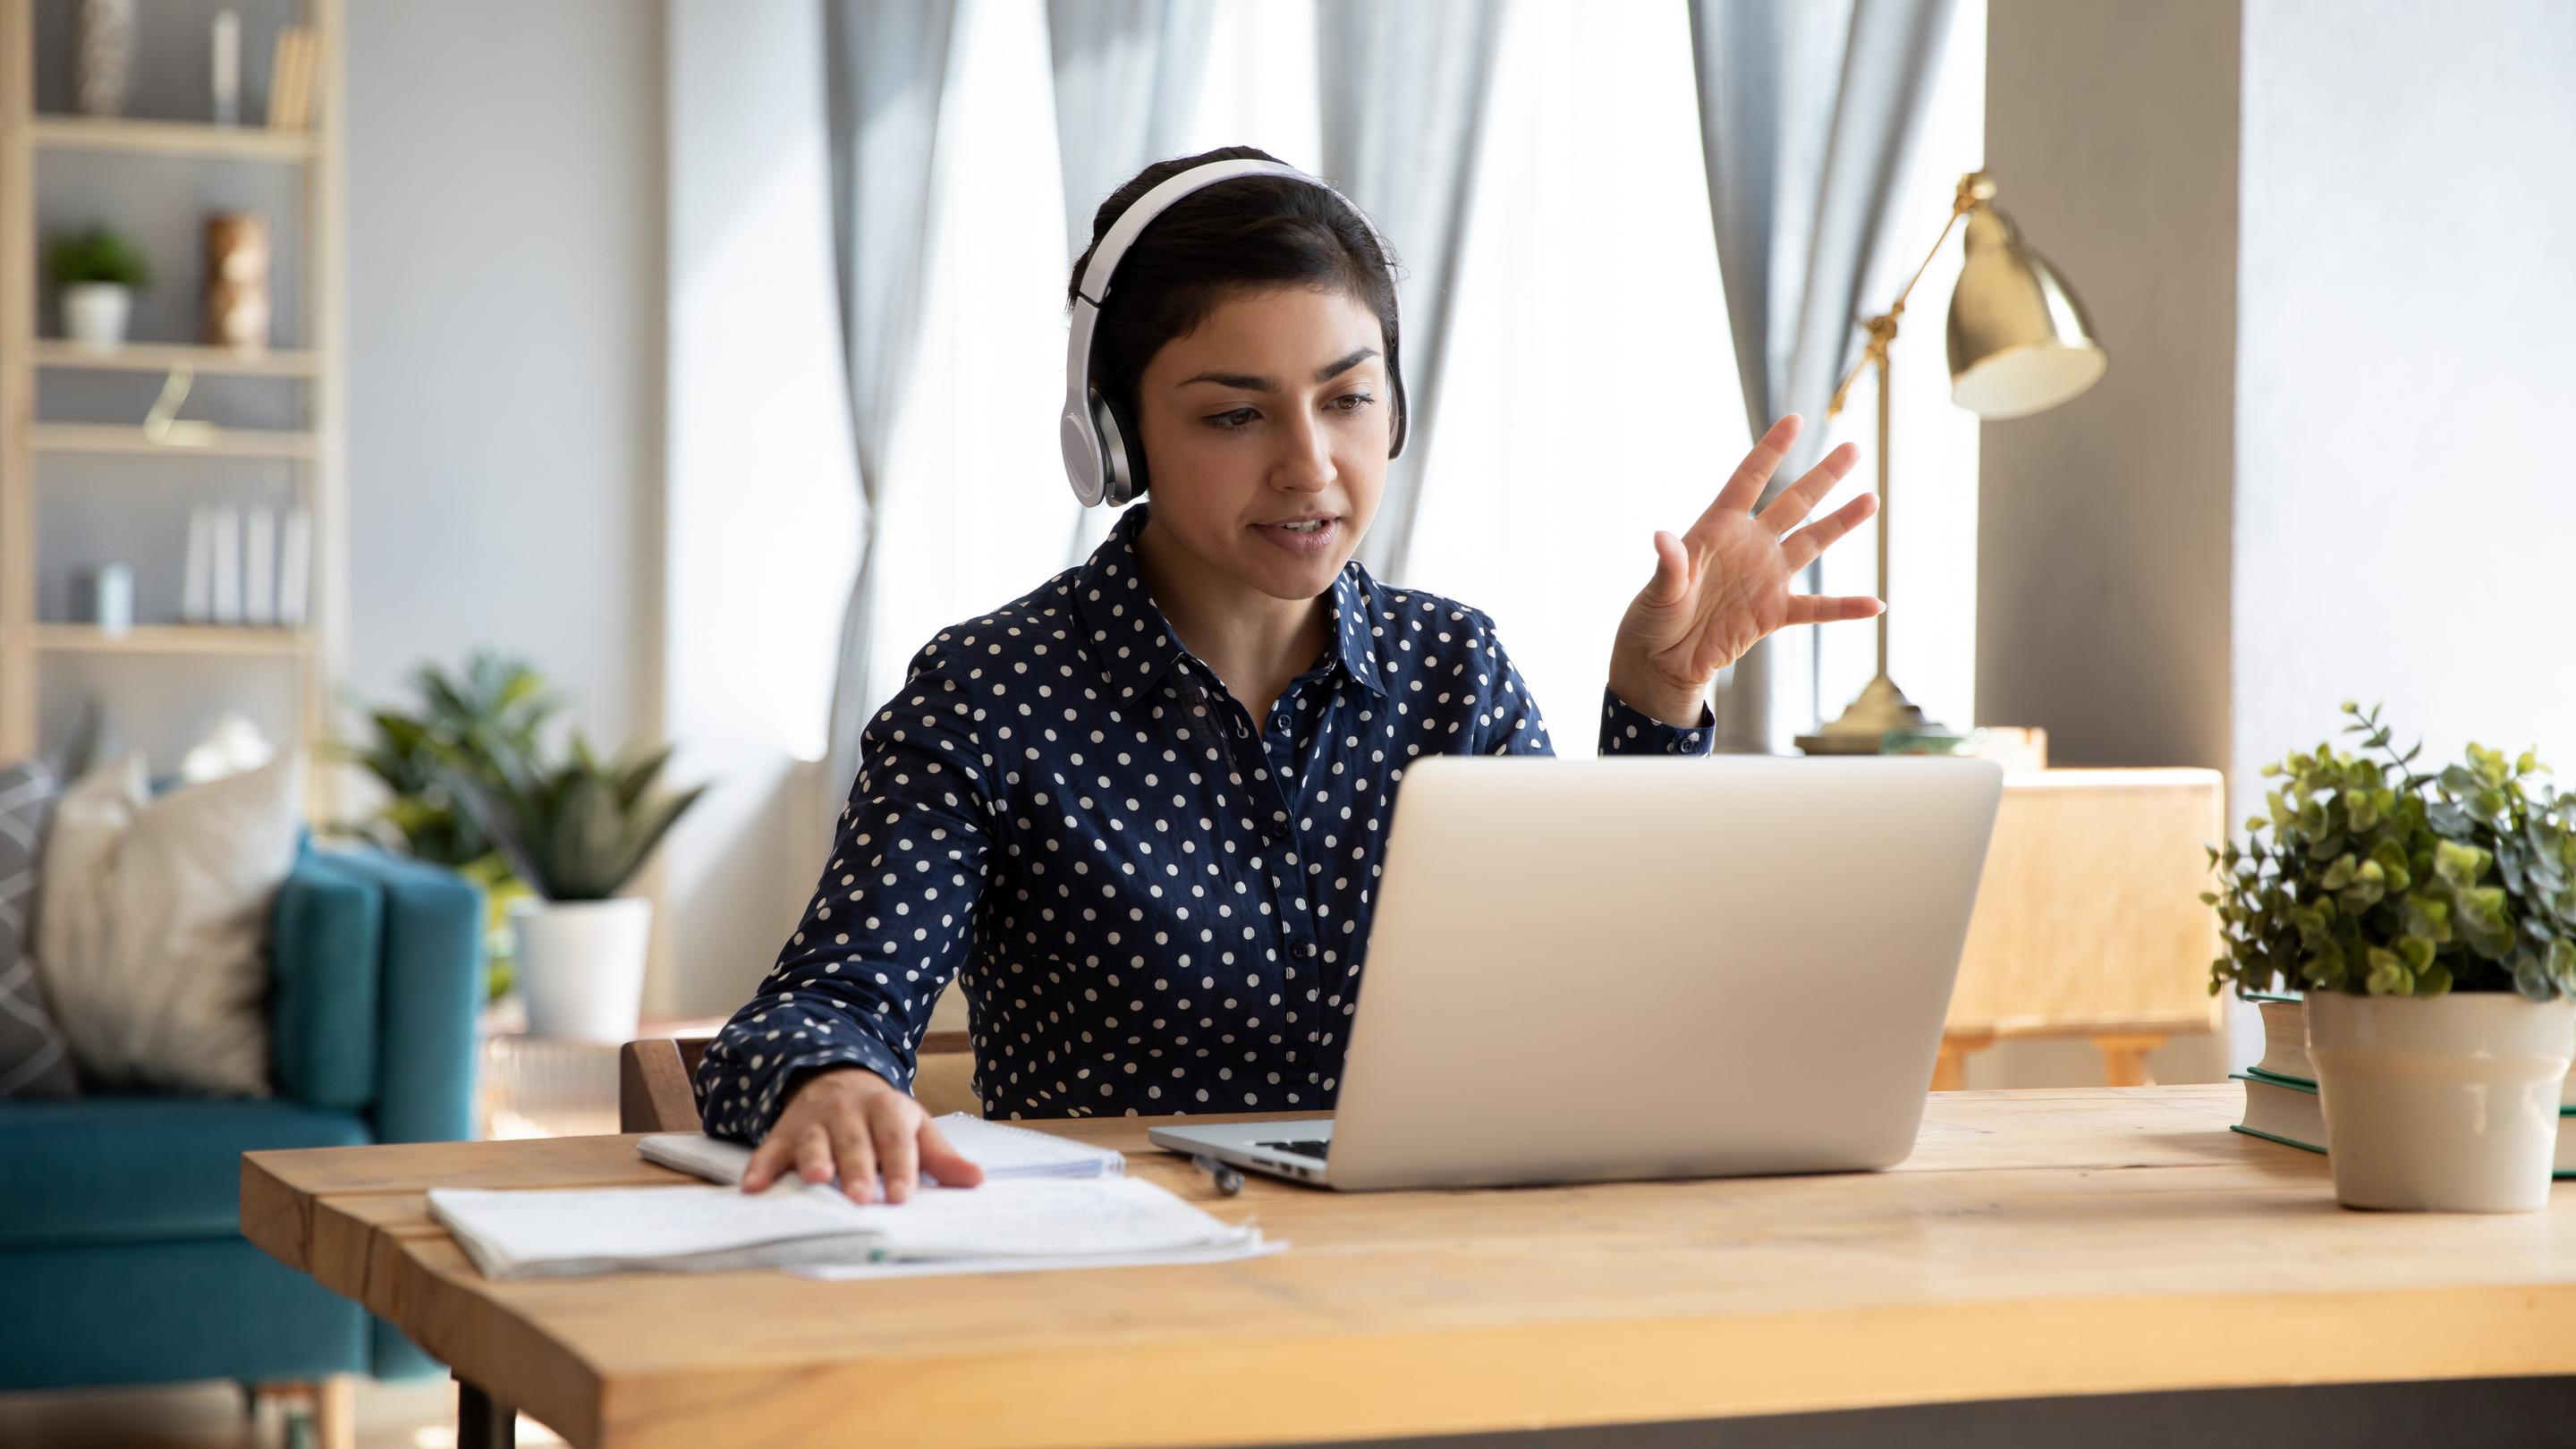 45% of women business leaders say it's difficult for women to speak up in  virtual meetings